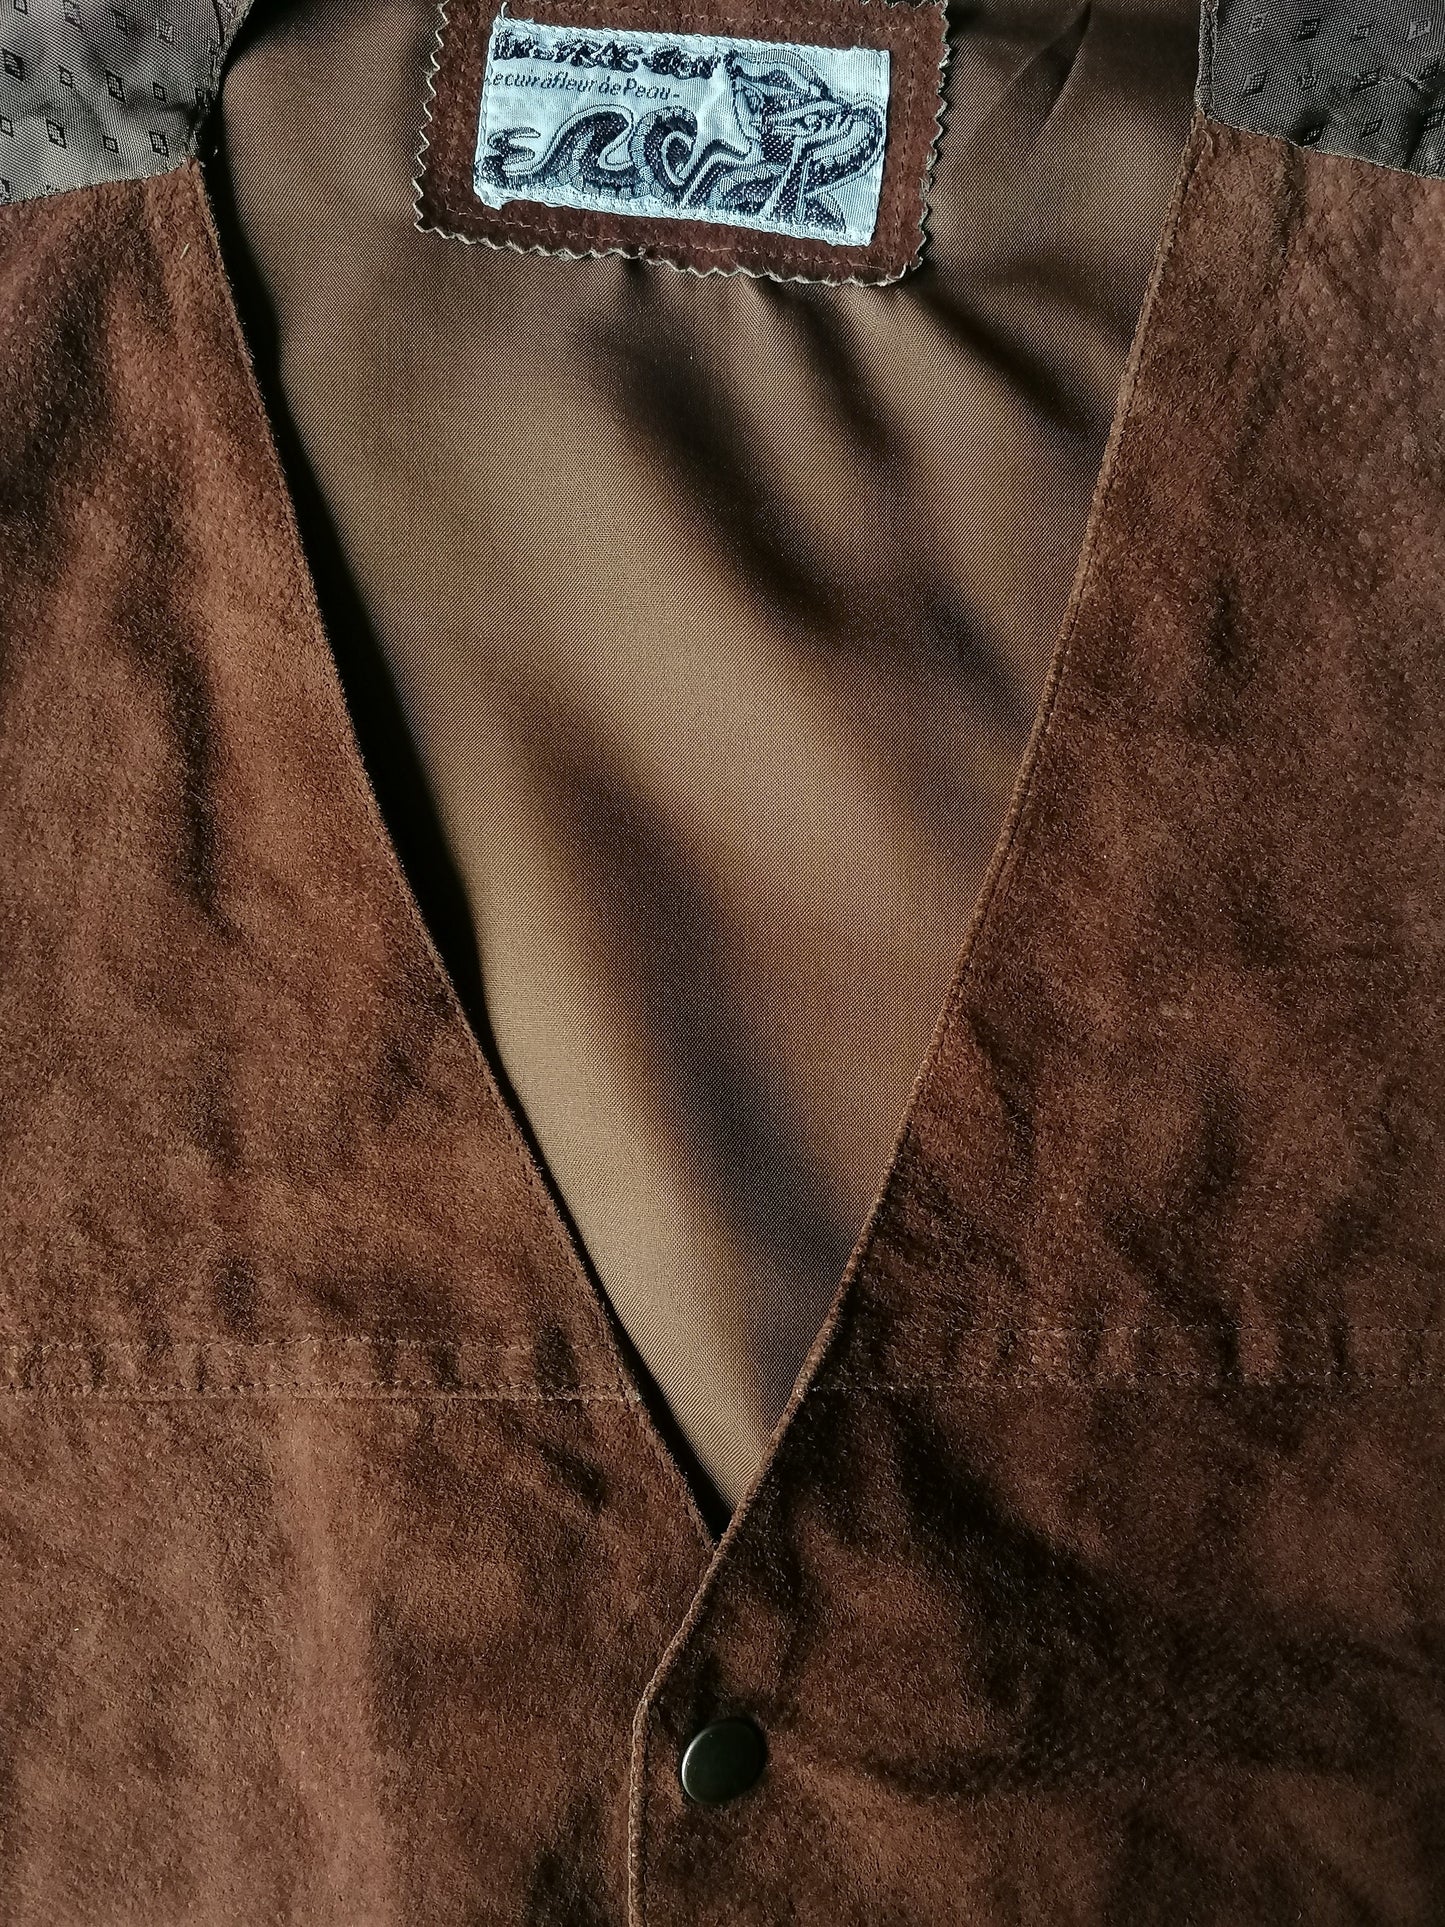 In-Frac-Tigs leather waistcoat with press studs. Brown colored. Size M.